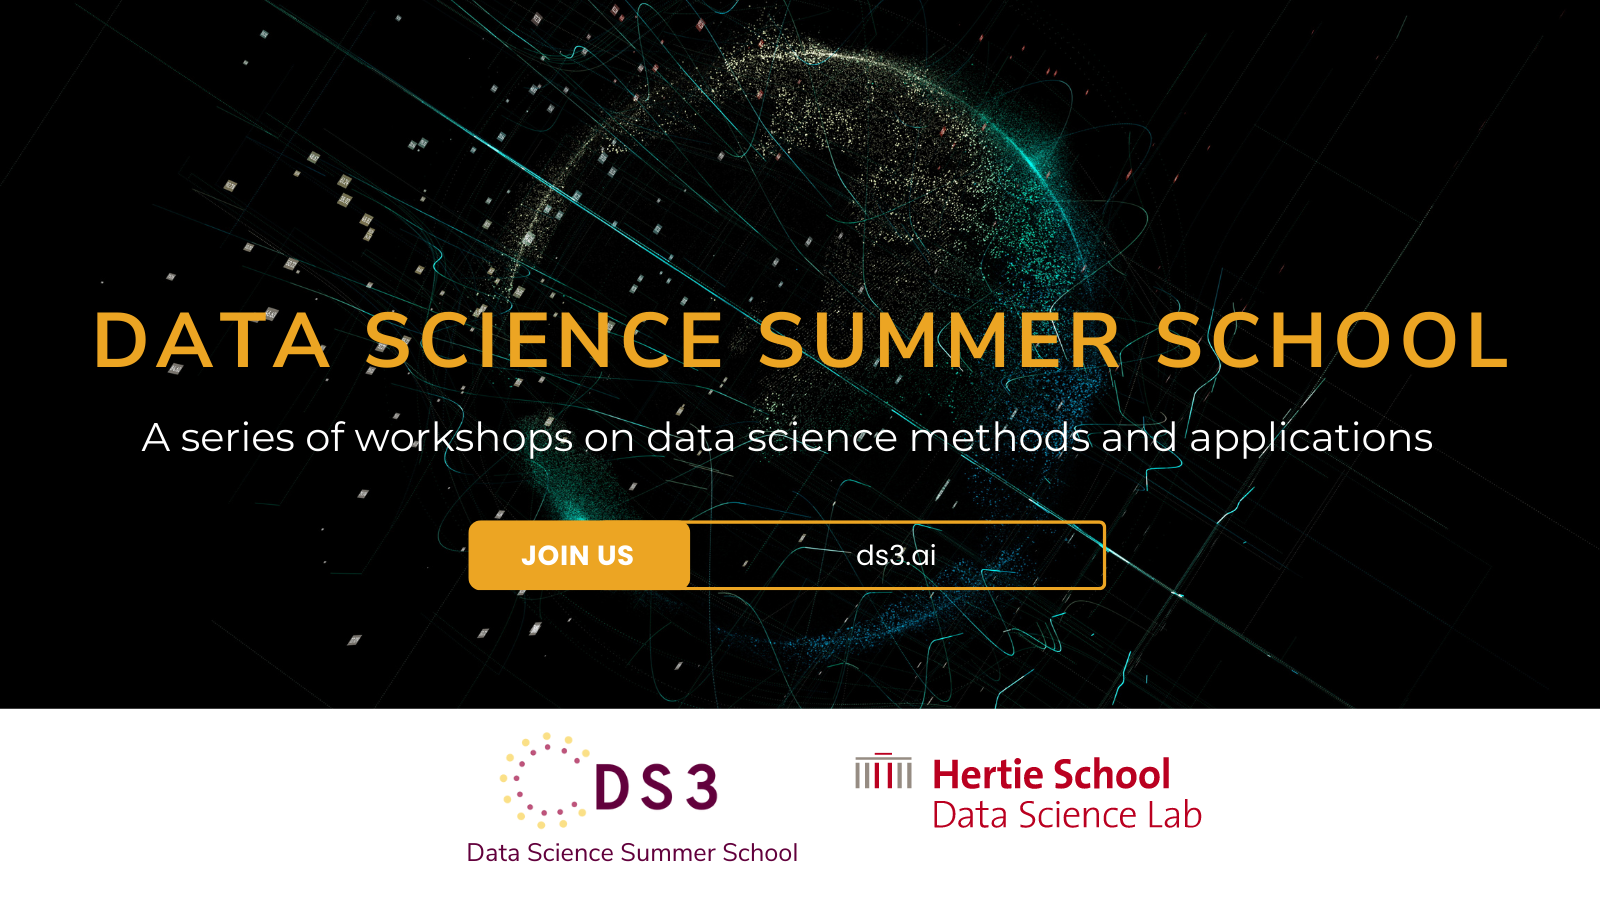 research data science summer school